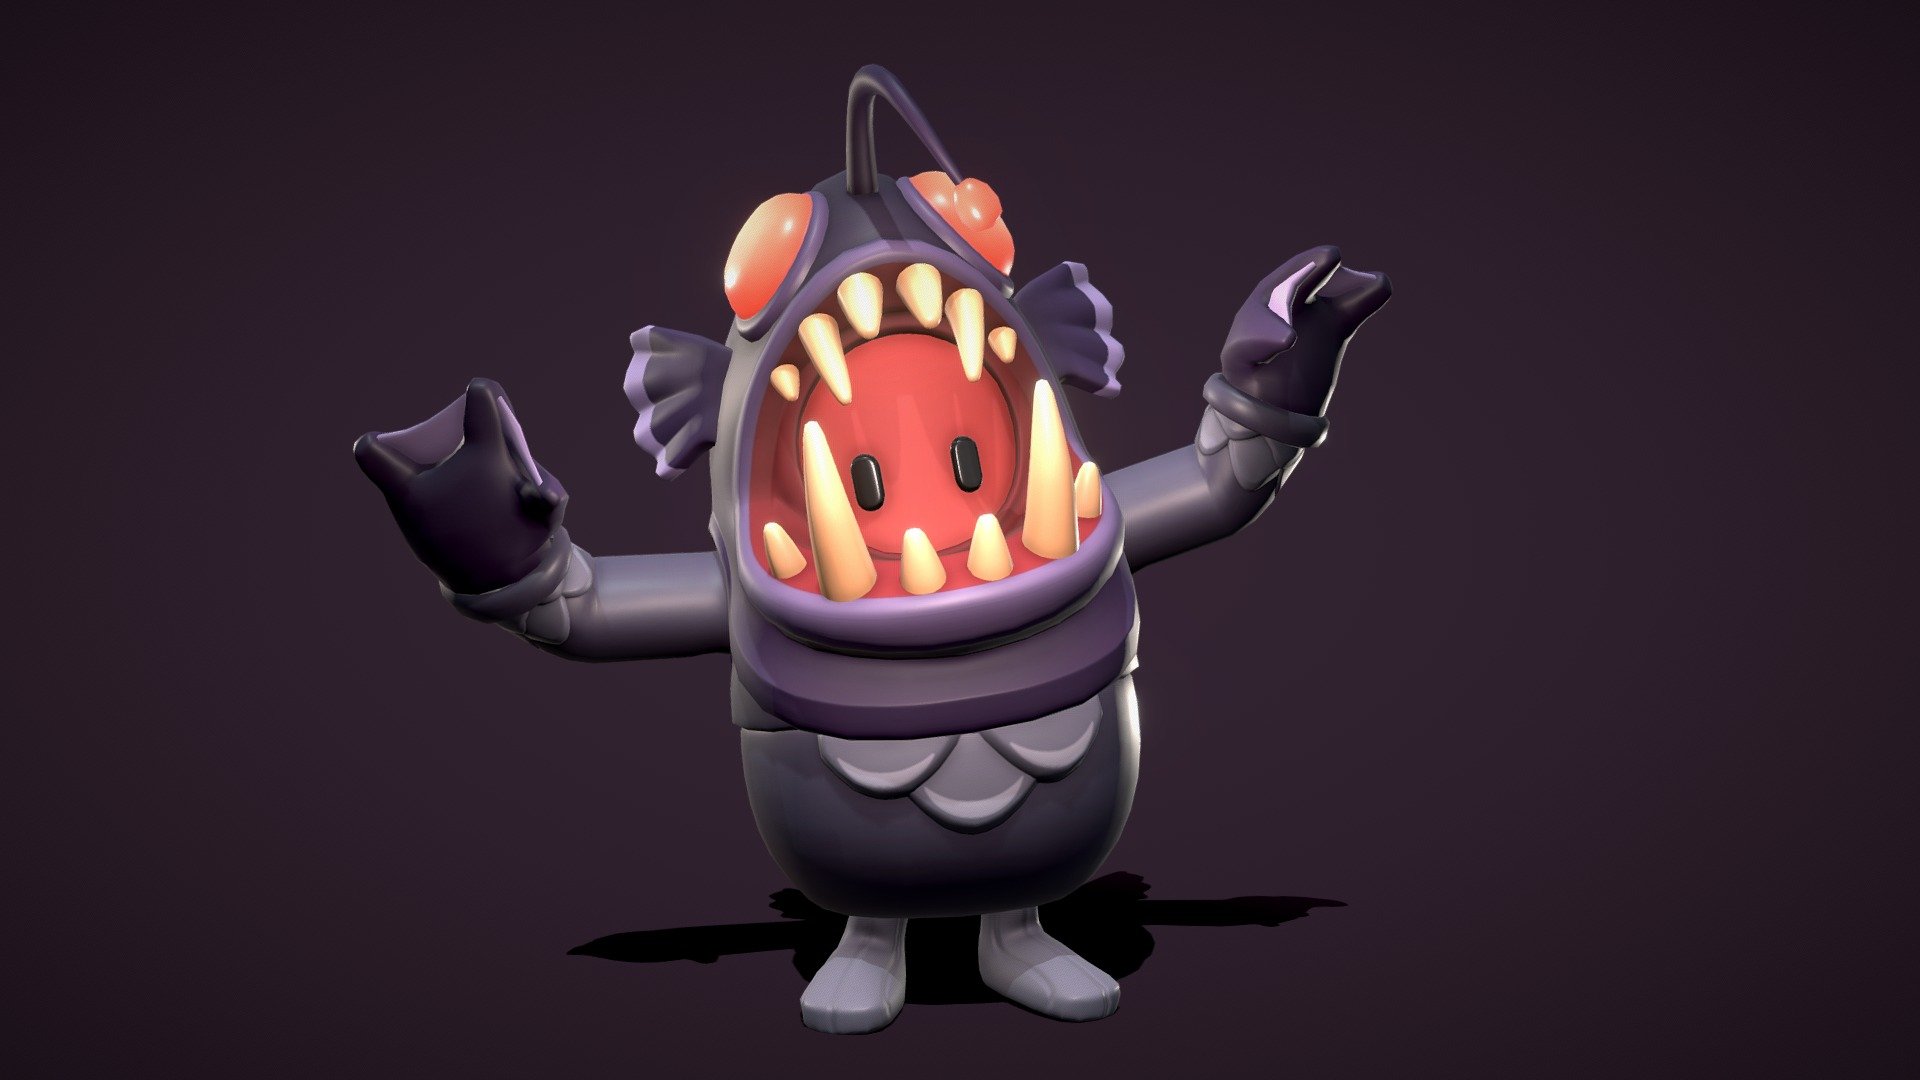 I had a lot of fun playing Fall Guys Ultimate Knockout lately so I decided to design and create my own original costume!
View the full project here: https://www.artstation.com/artwork/68dn0O - Fall Guys Anglerfish Costume - 3D model by Lars Korden (@Lark.Art) 3d model